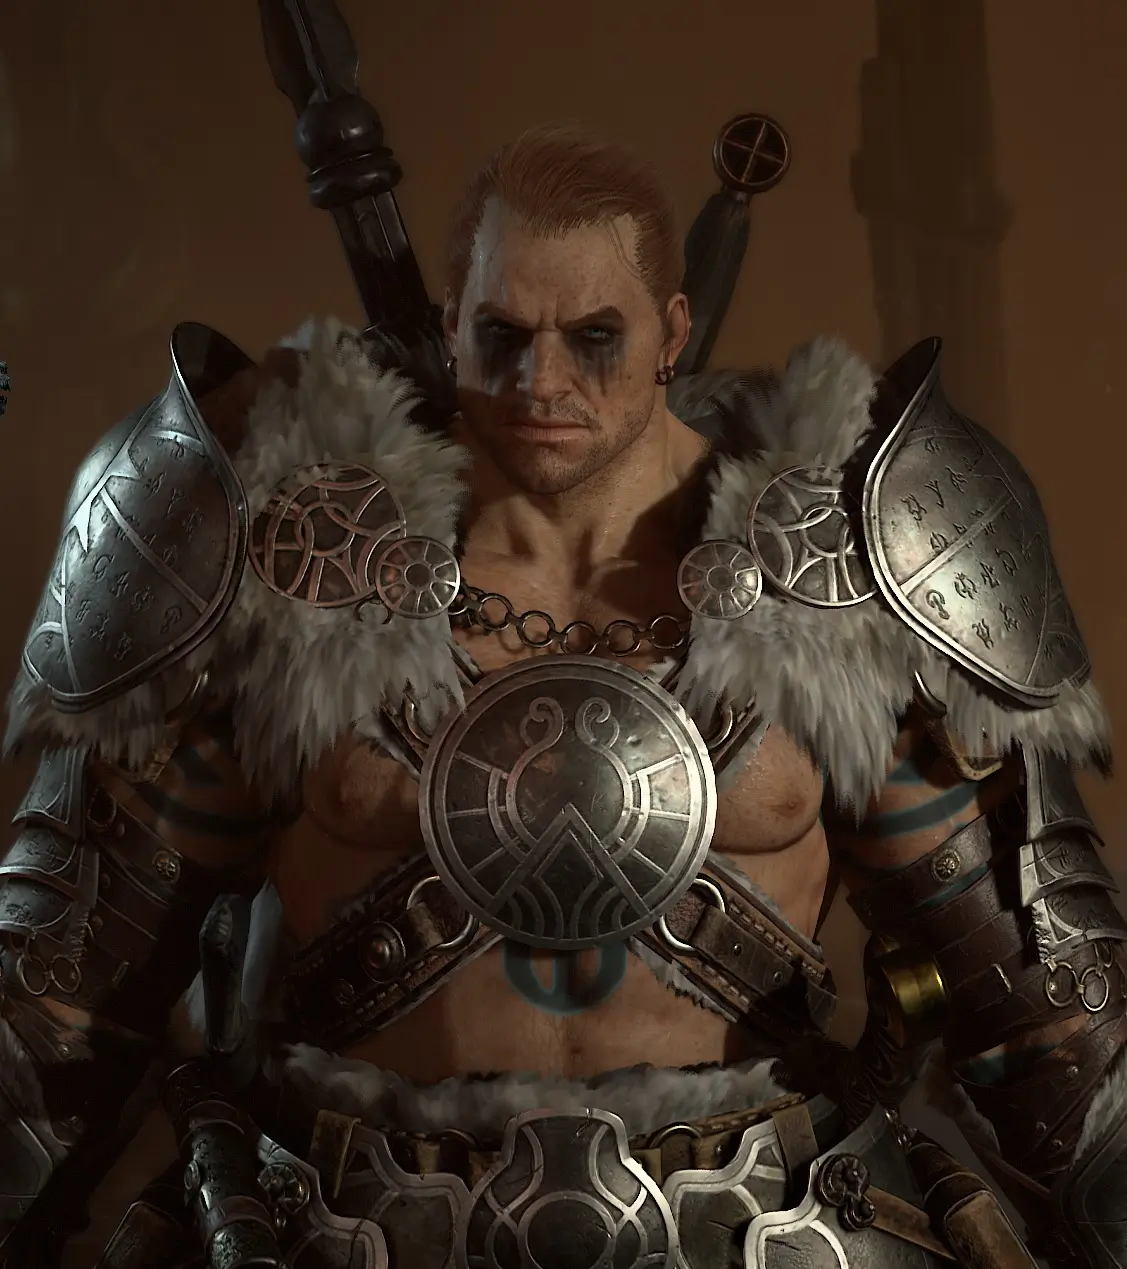 Diablo IV Barbarian character with gear